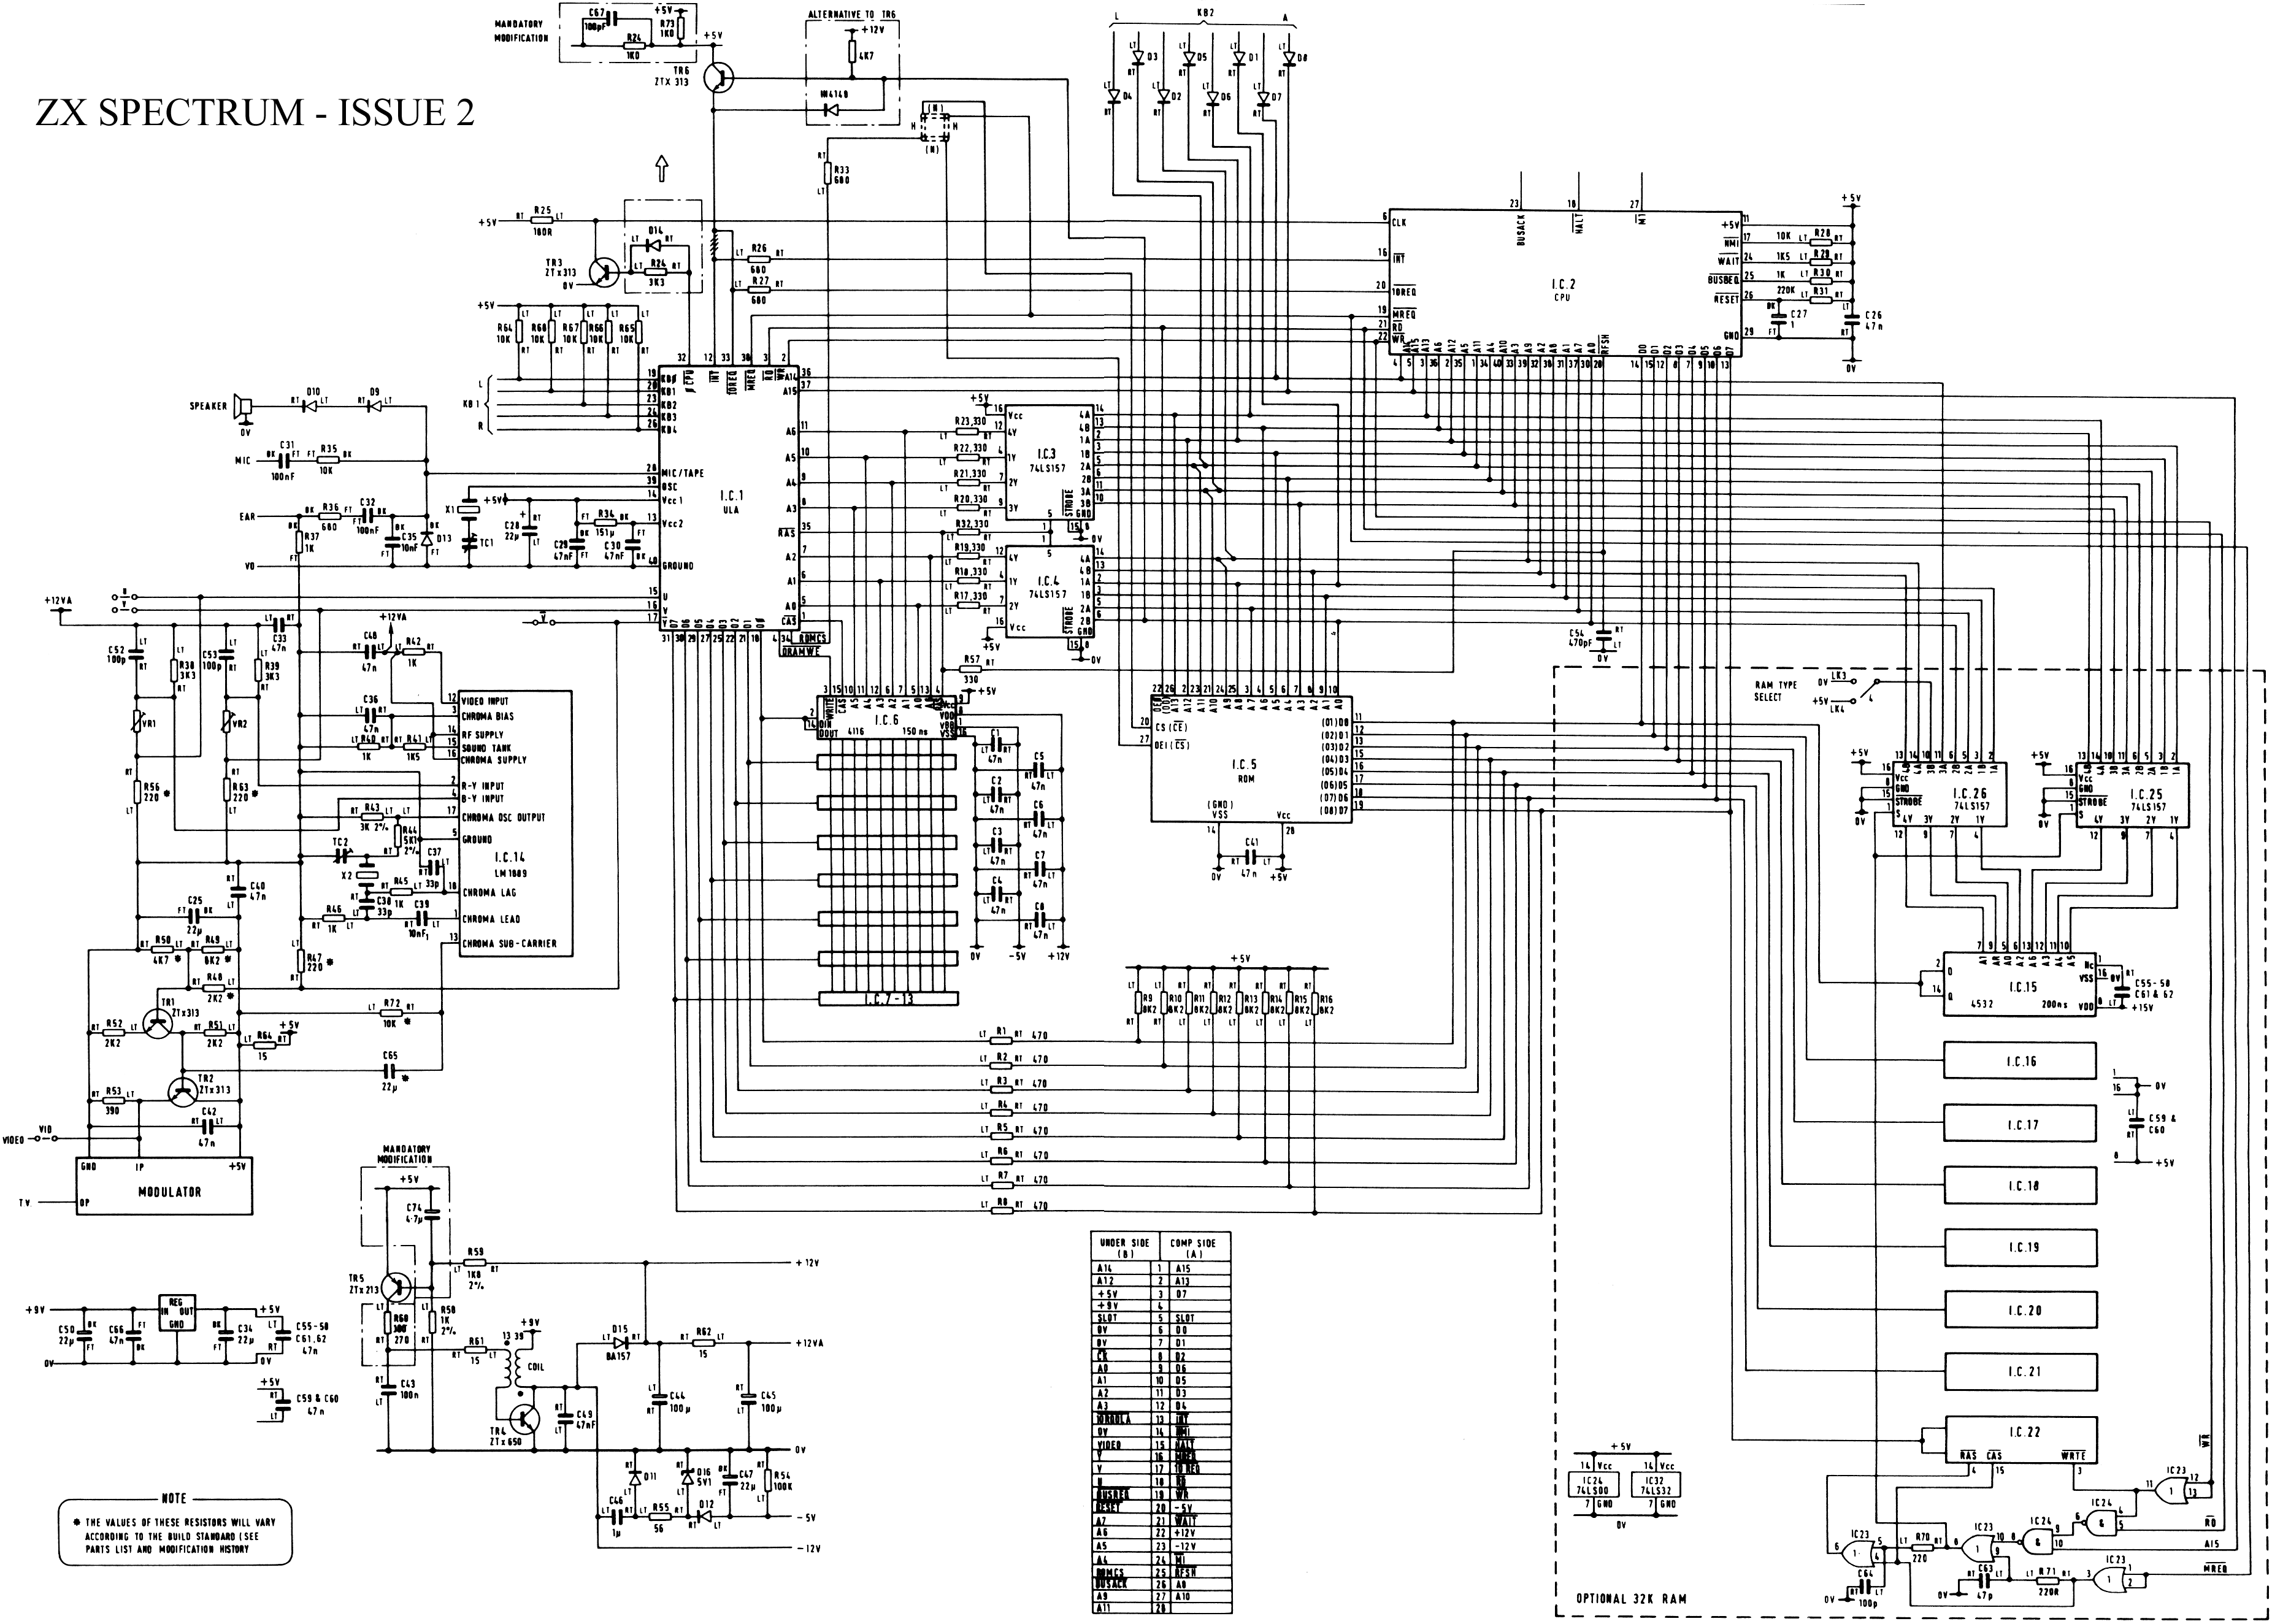 ZX Spectrum PCB Schematics and Layout - Spectrum for Everyone